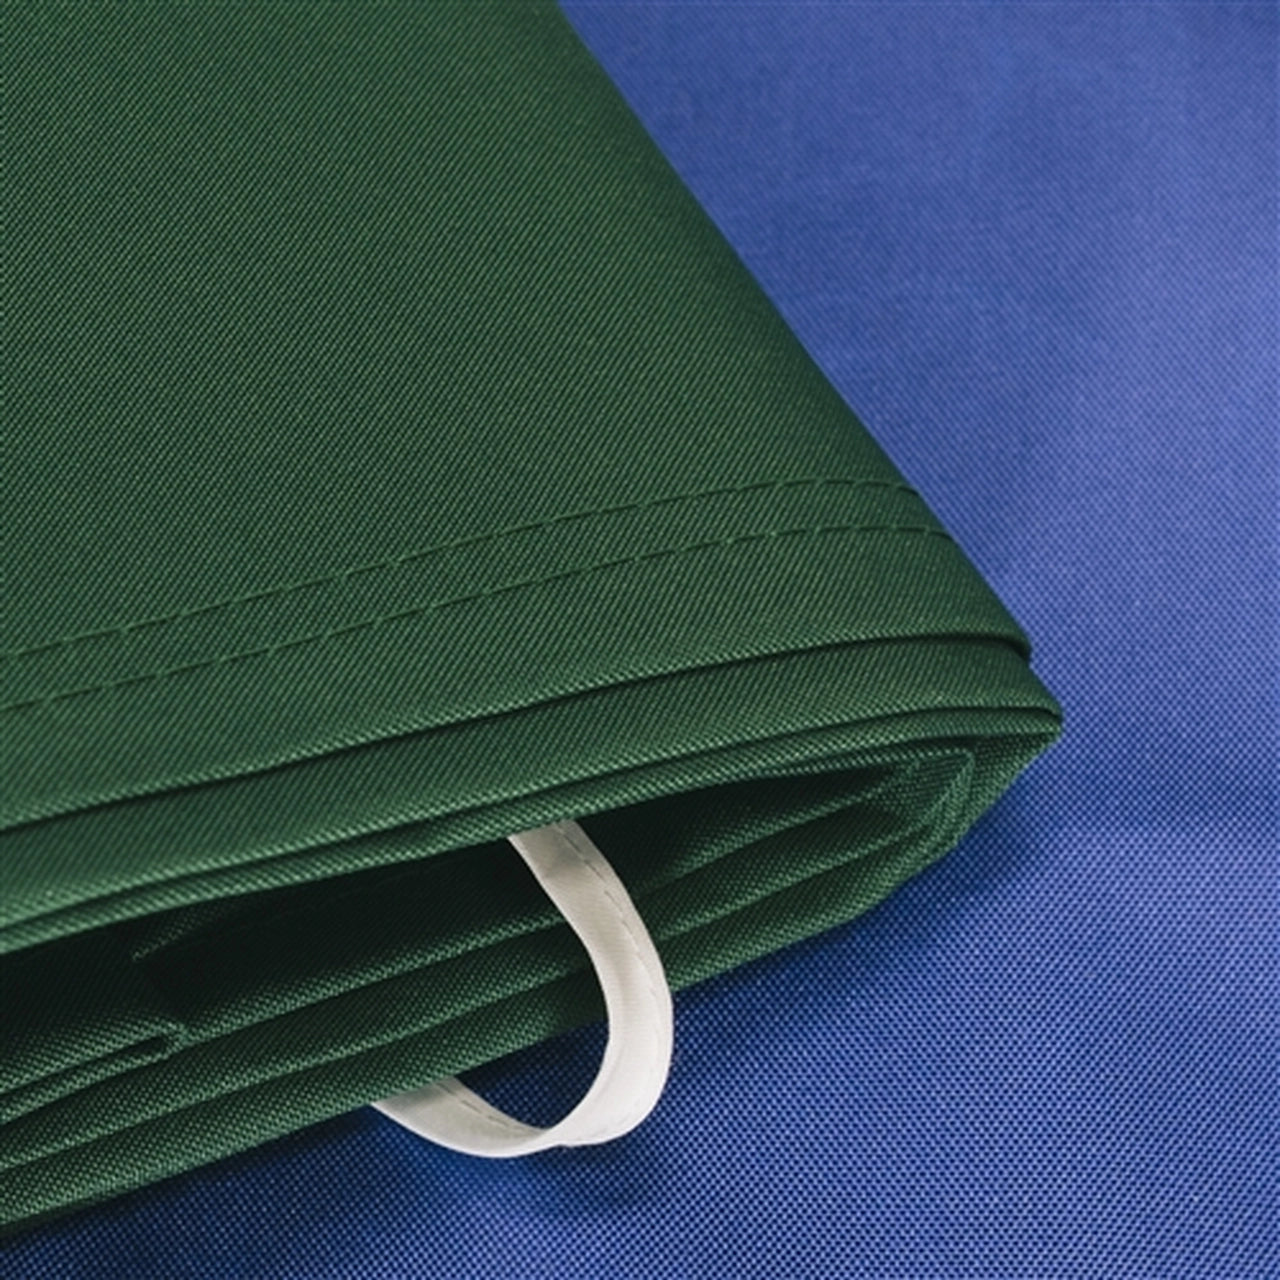 Aleko Protective Awning Cover - 20 x 10 Feet - Green